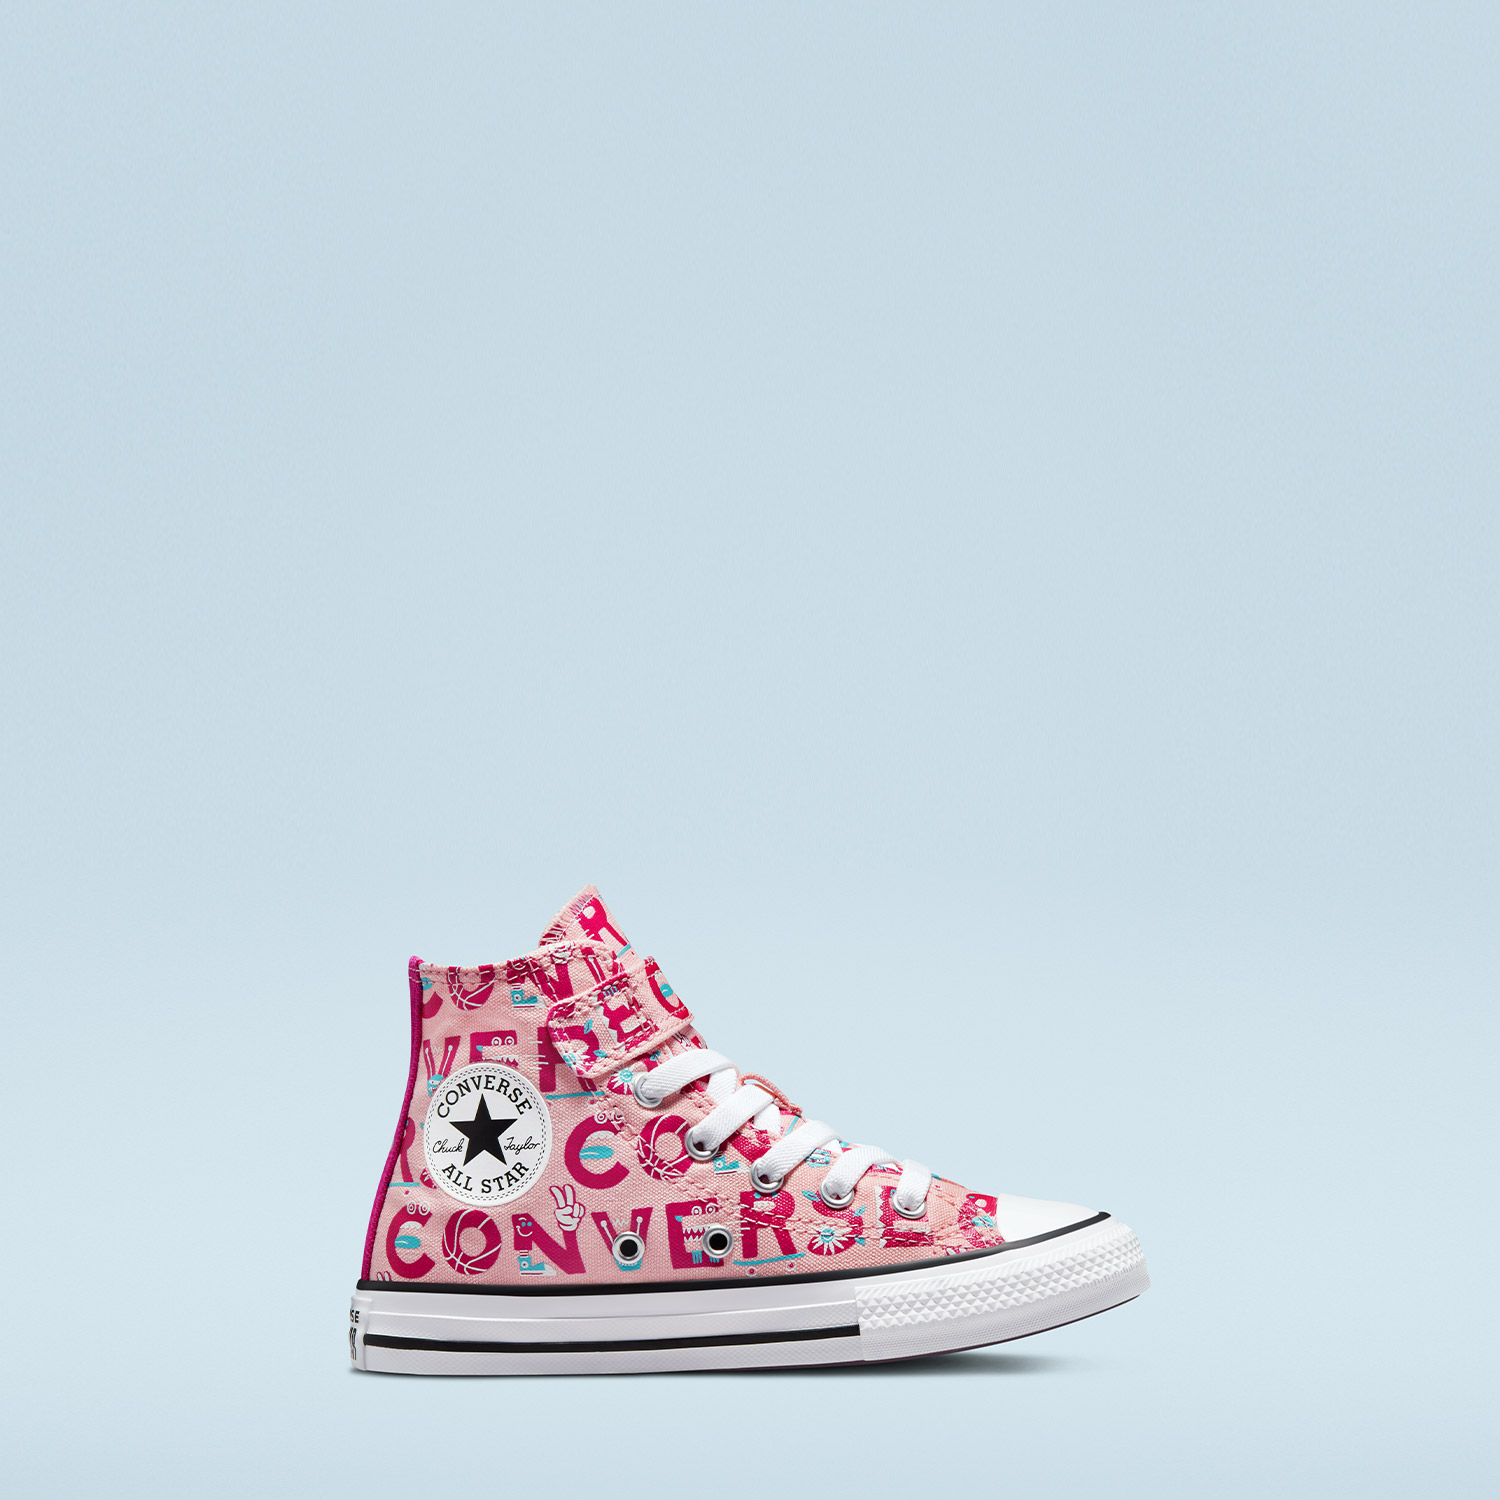  Chuck Taylor All Star 1V Creature Feature